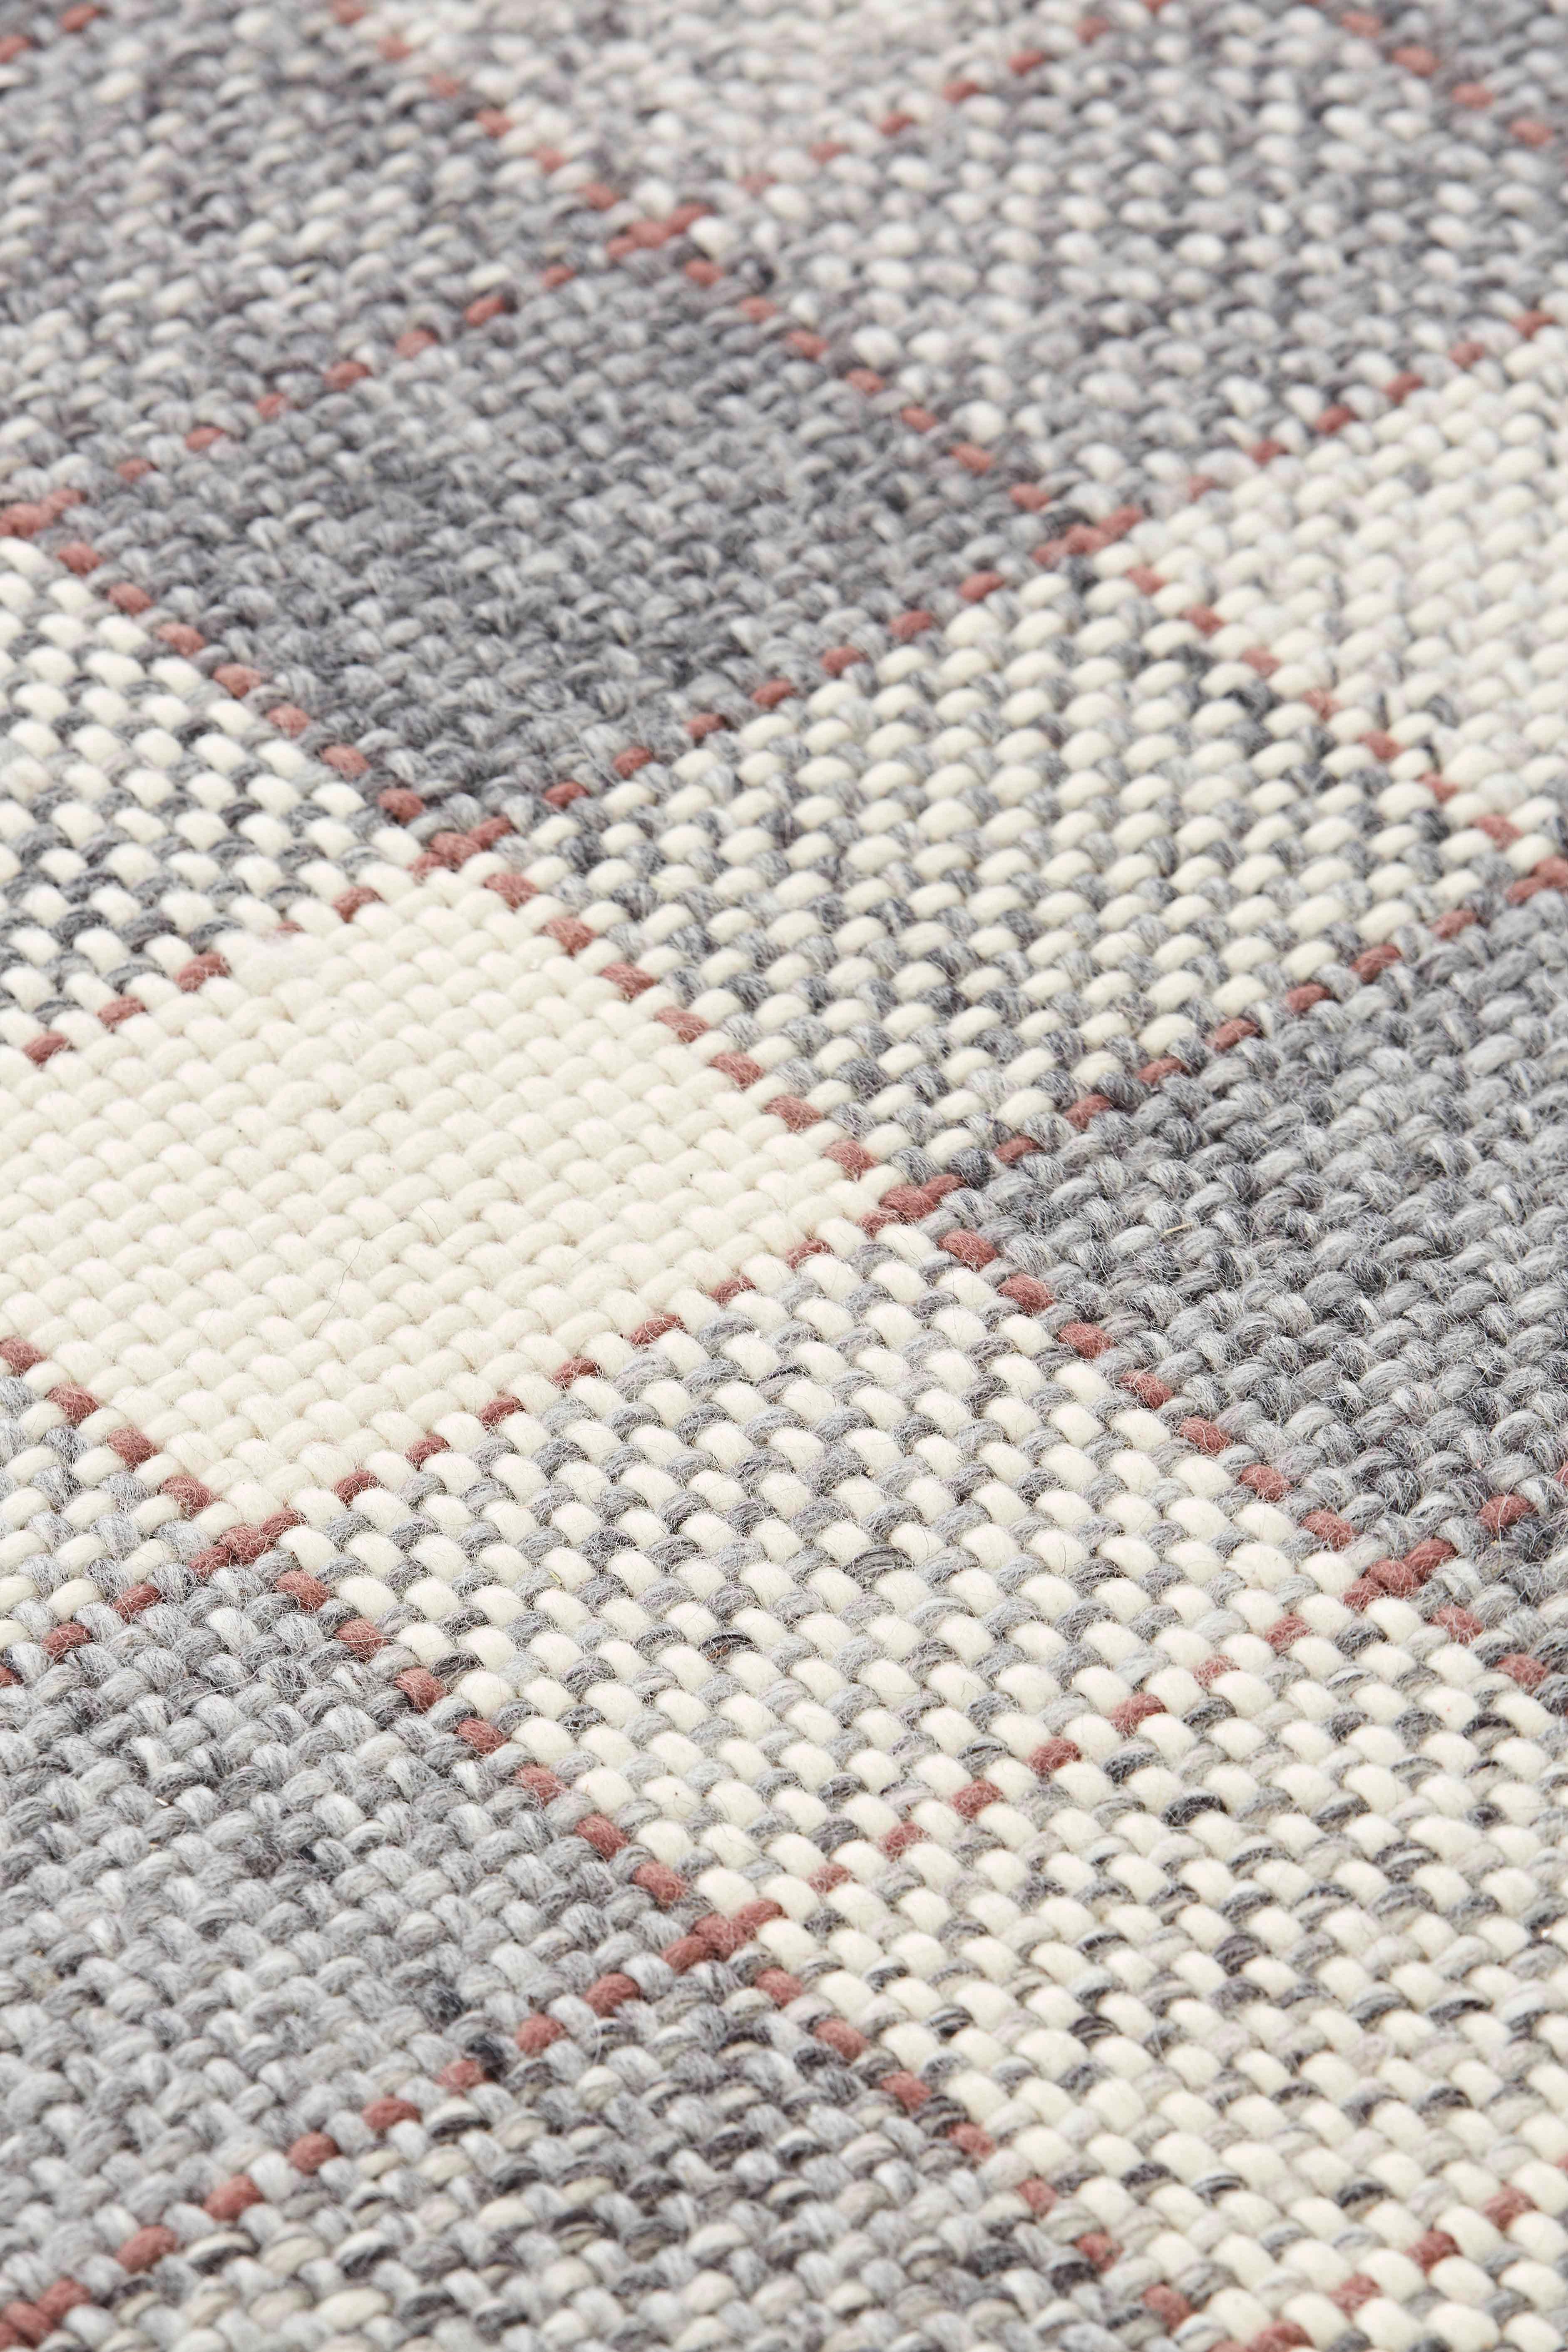 Neutral tones and warp and weft are the starts in this new collection, hand-woven, from the GAN team. Cuadros plays with natural wool colors, flexible threads and a classic design, to create comfortable and calm spaces that work well in any